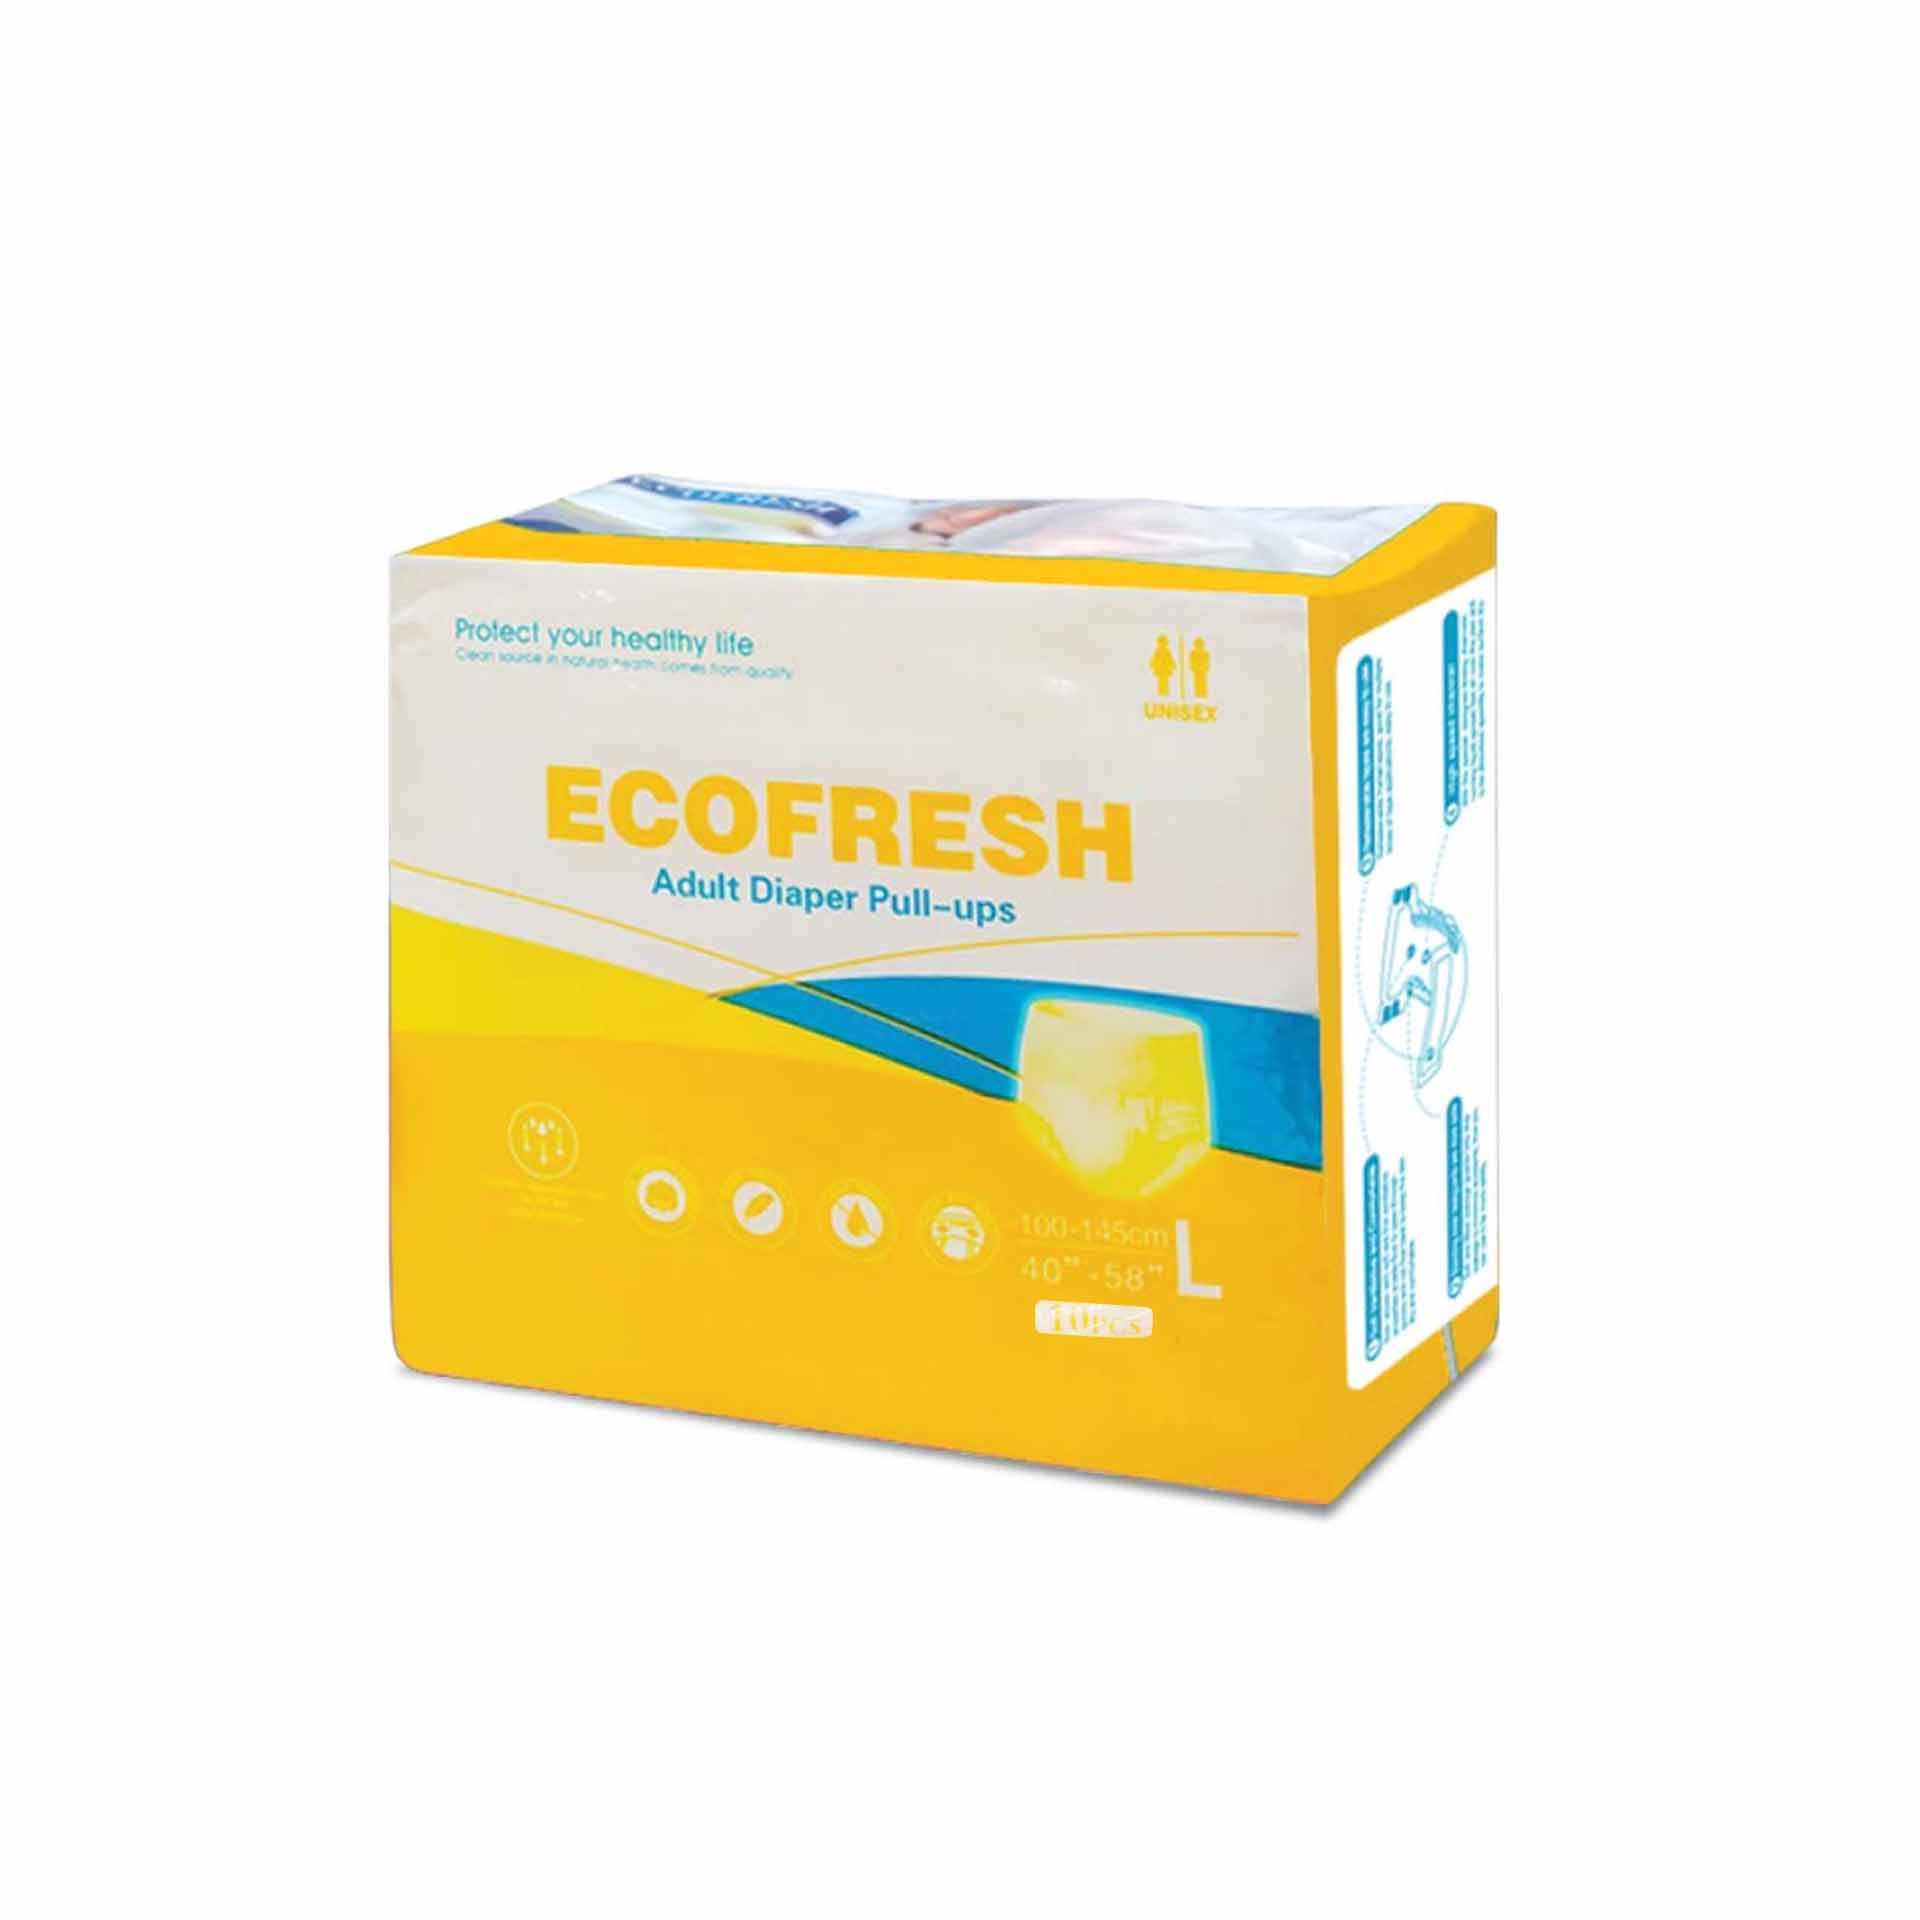 Adult Diaper Pant System L (Ecofresh) 10's Pack  